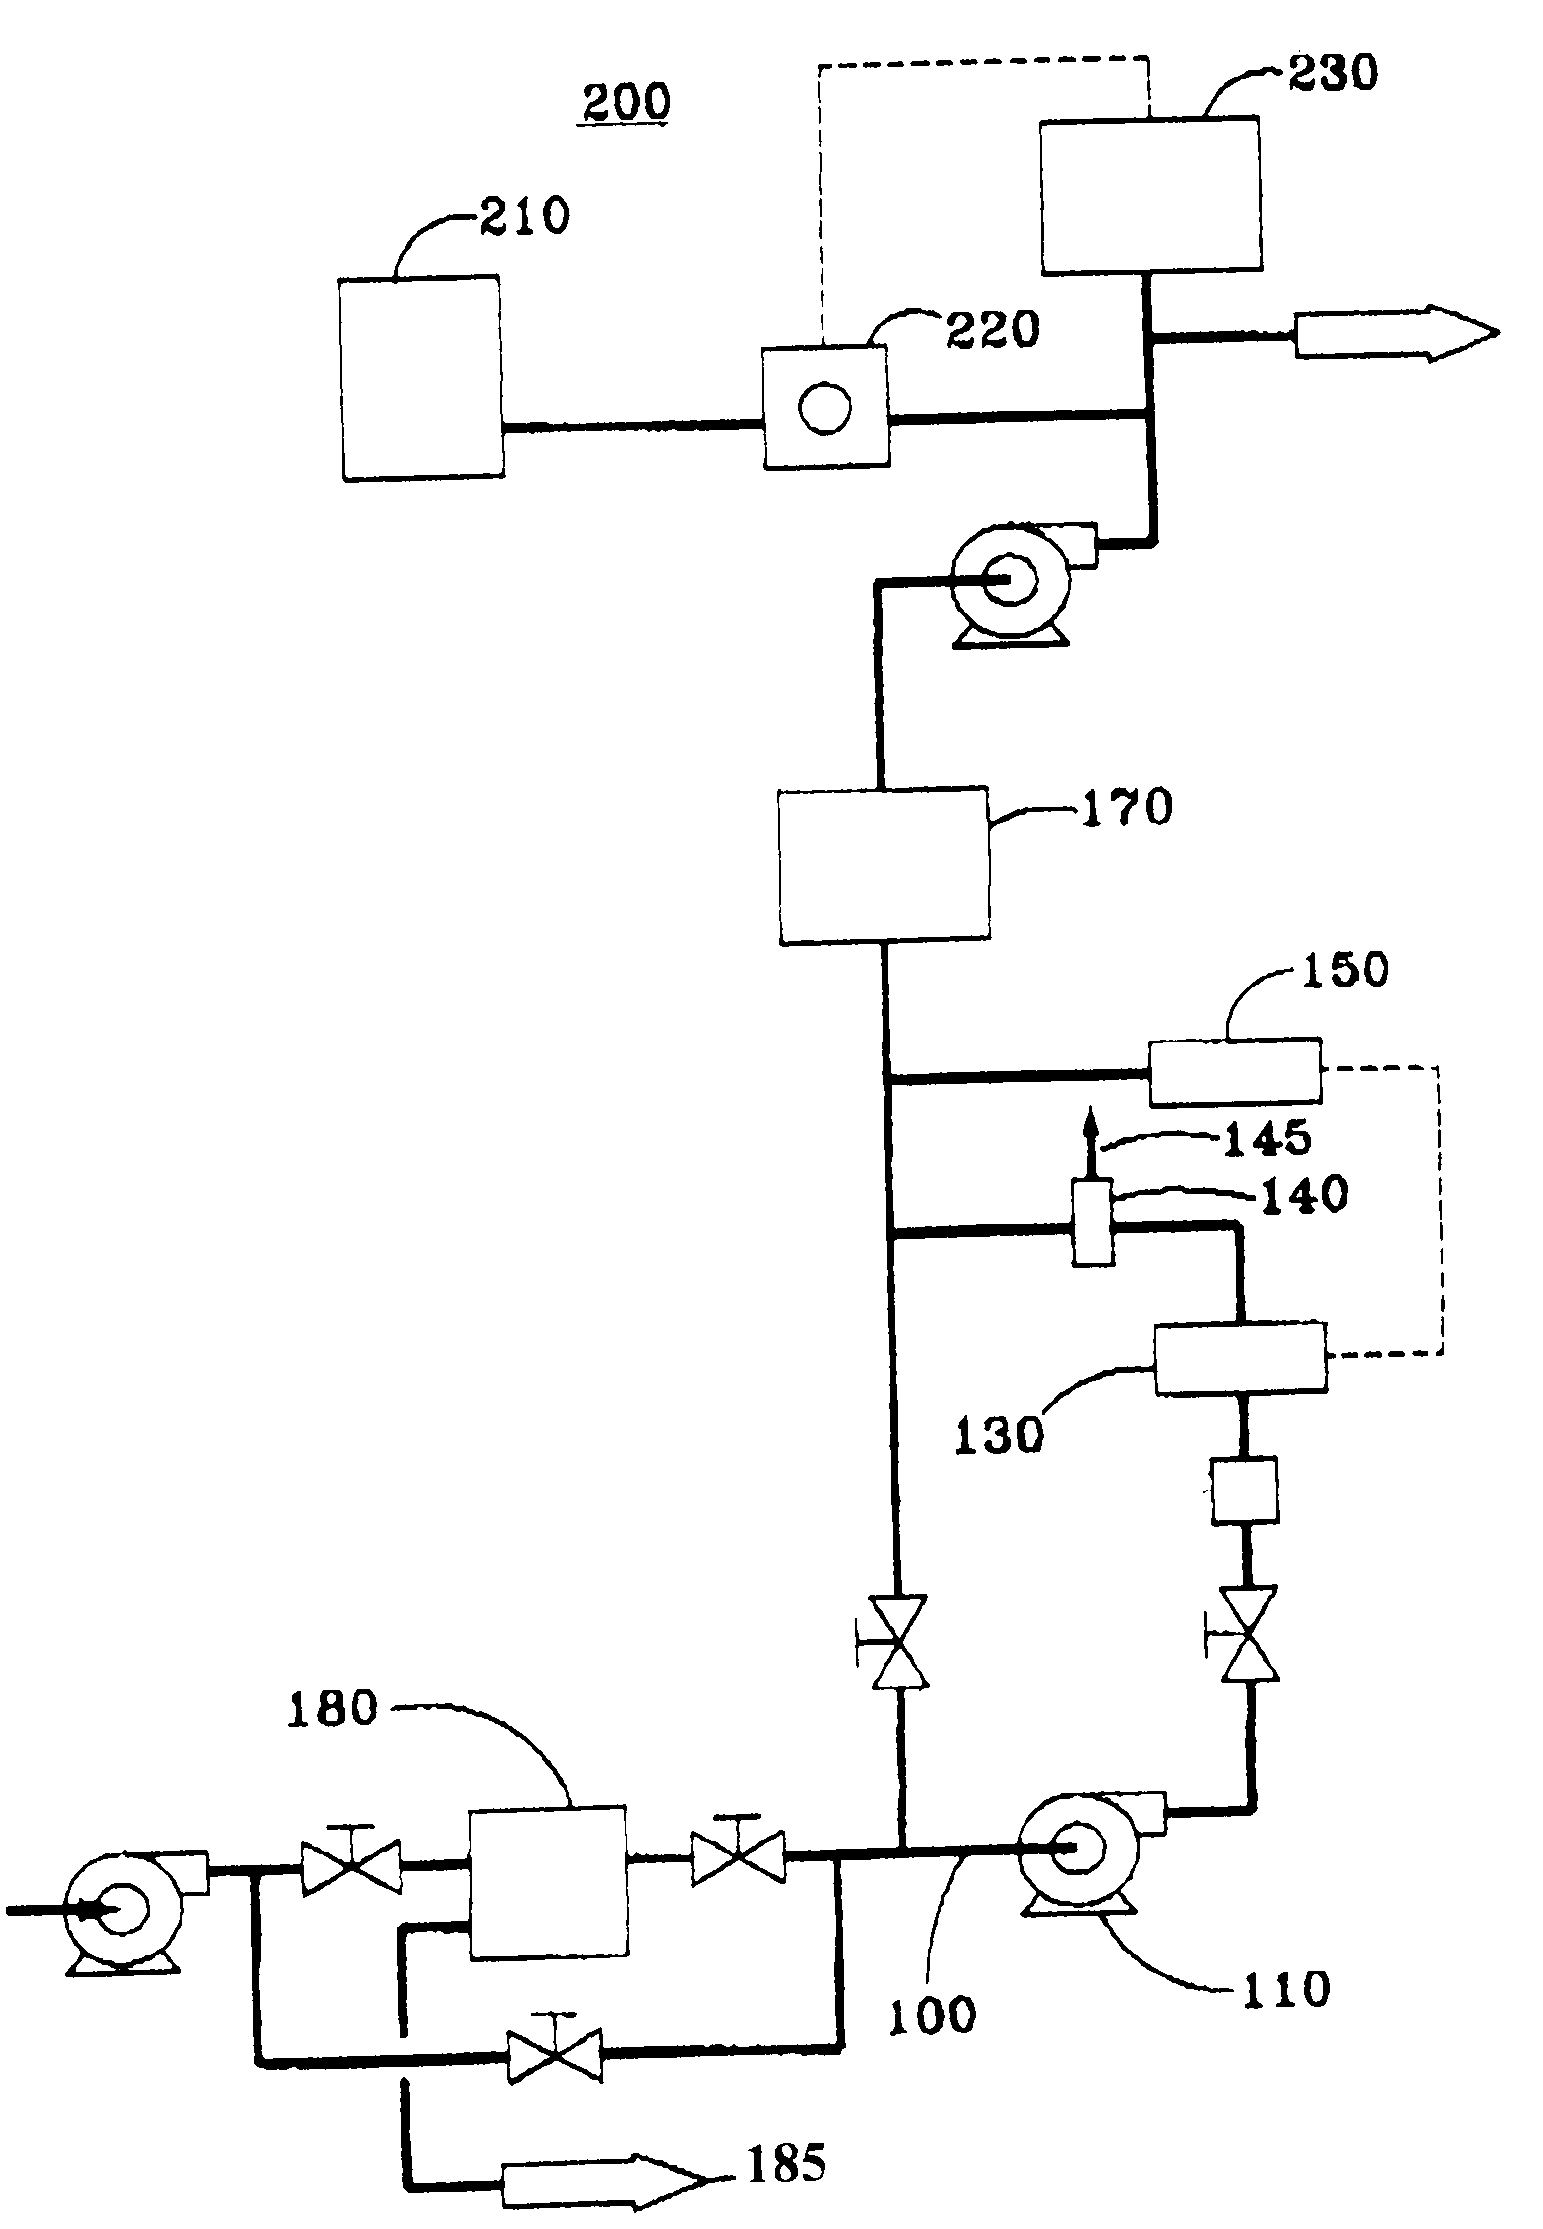 System and Process for Treatment and De-halogenation of Ballast Water